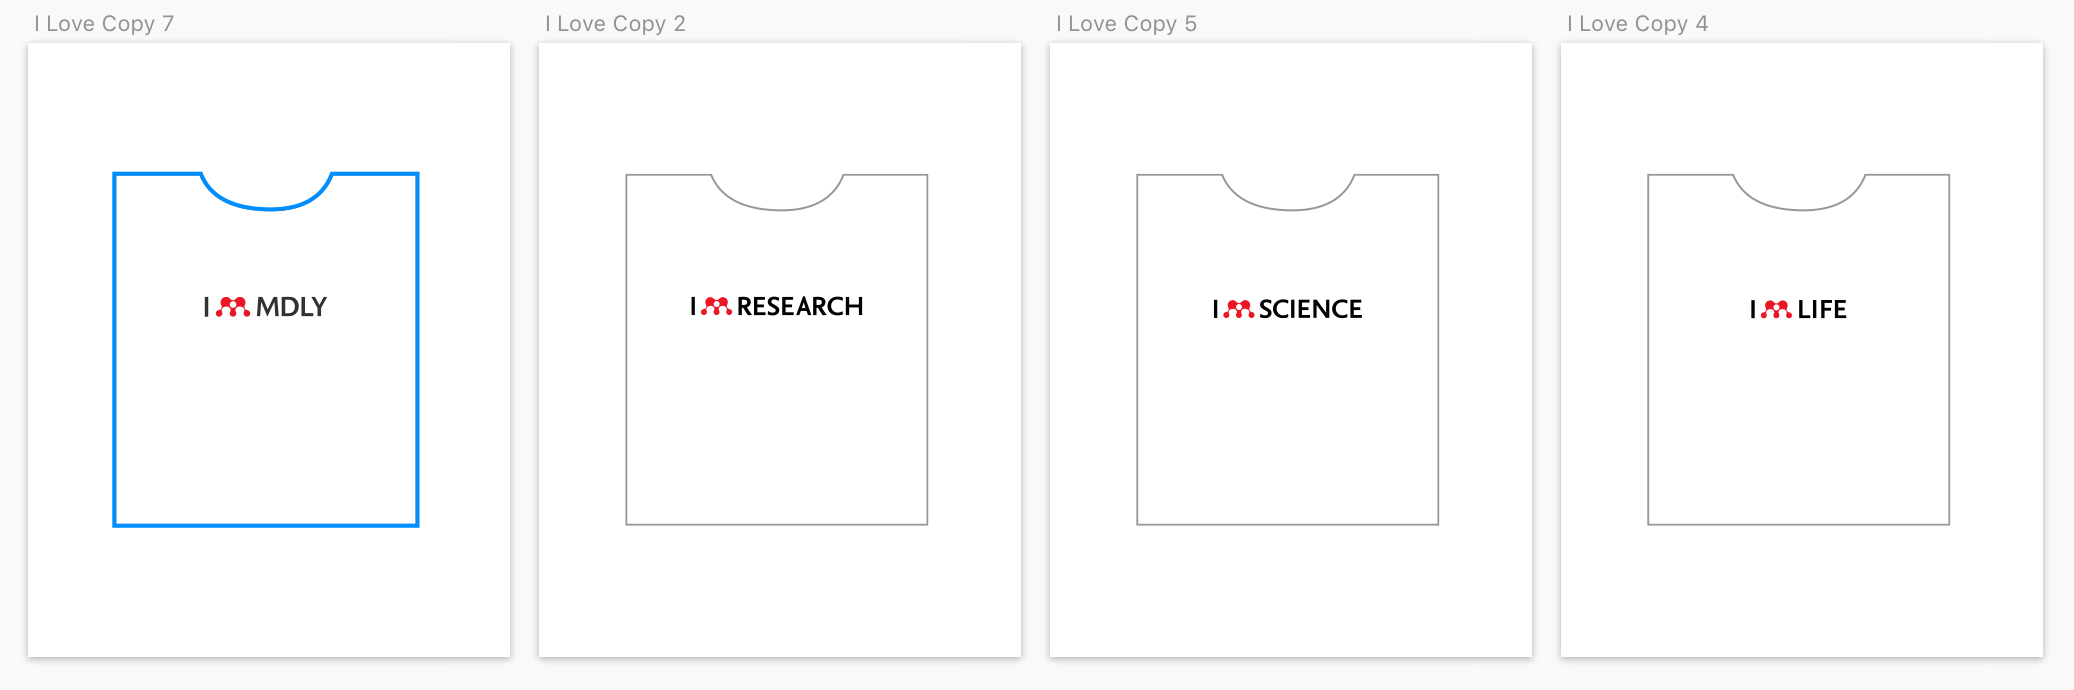 More mendeley brand campaign ideas